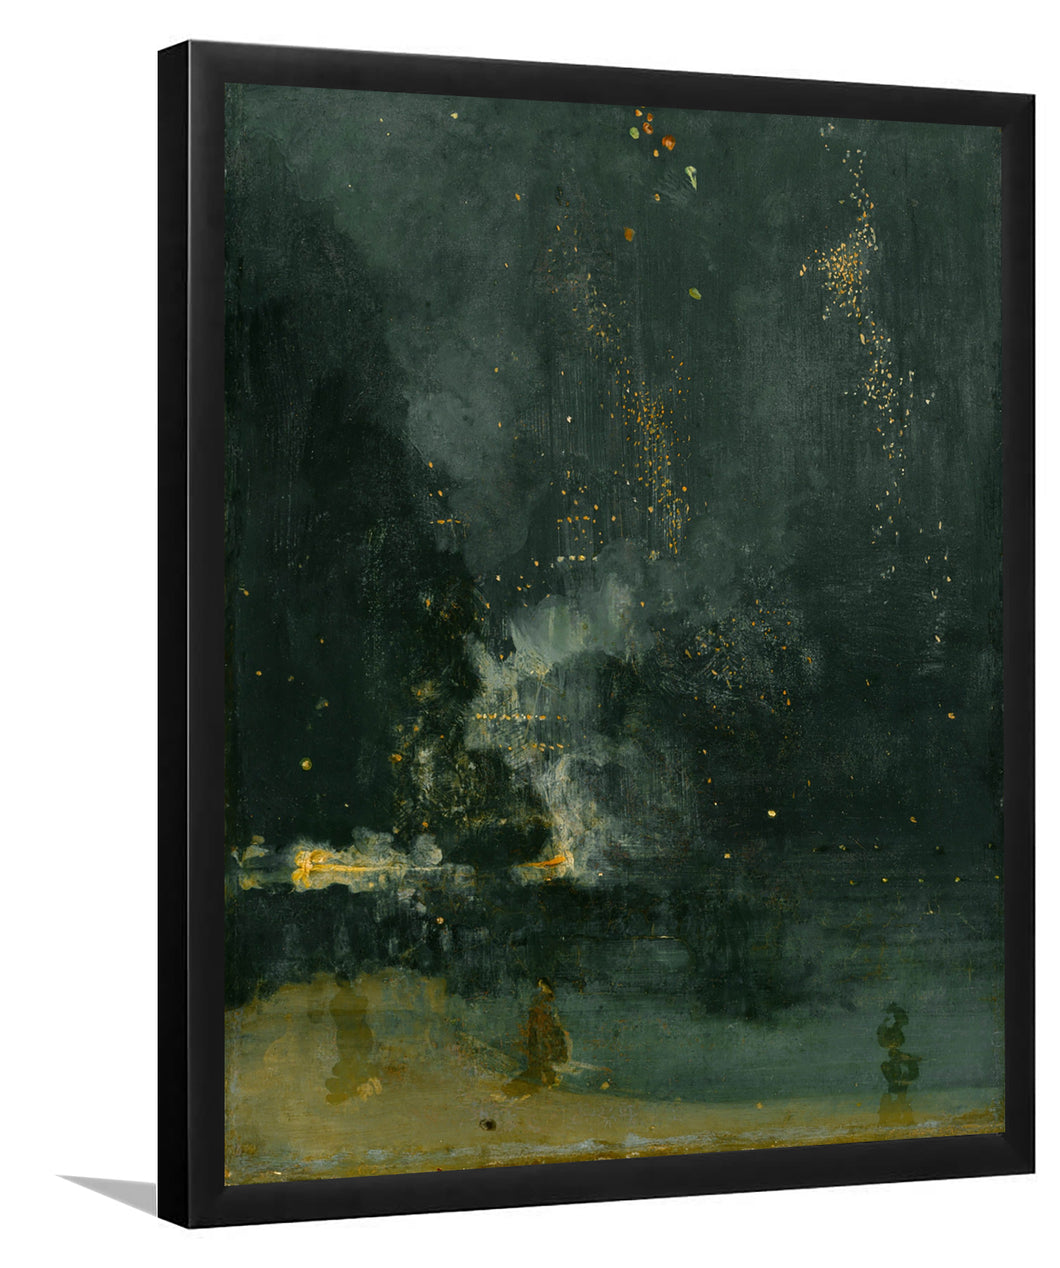 Nocturne In Black And Gold. The Falling Rocket By James Abbot Mcneill Whistler-Art Print,Frame Art,Plexiglass Cover